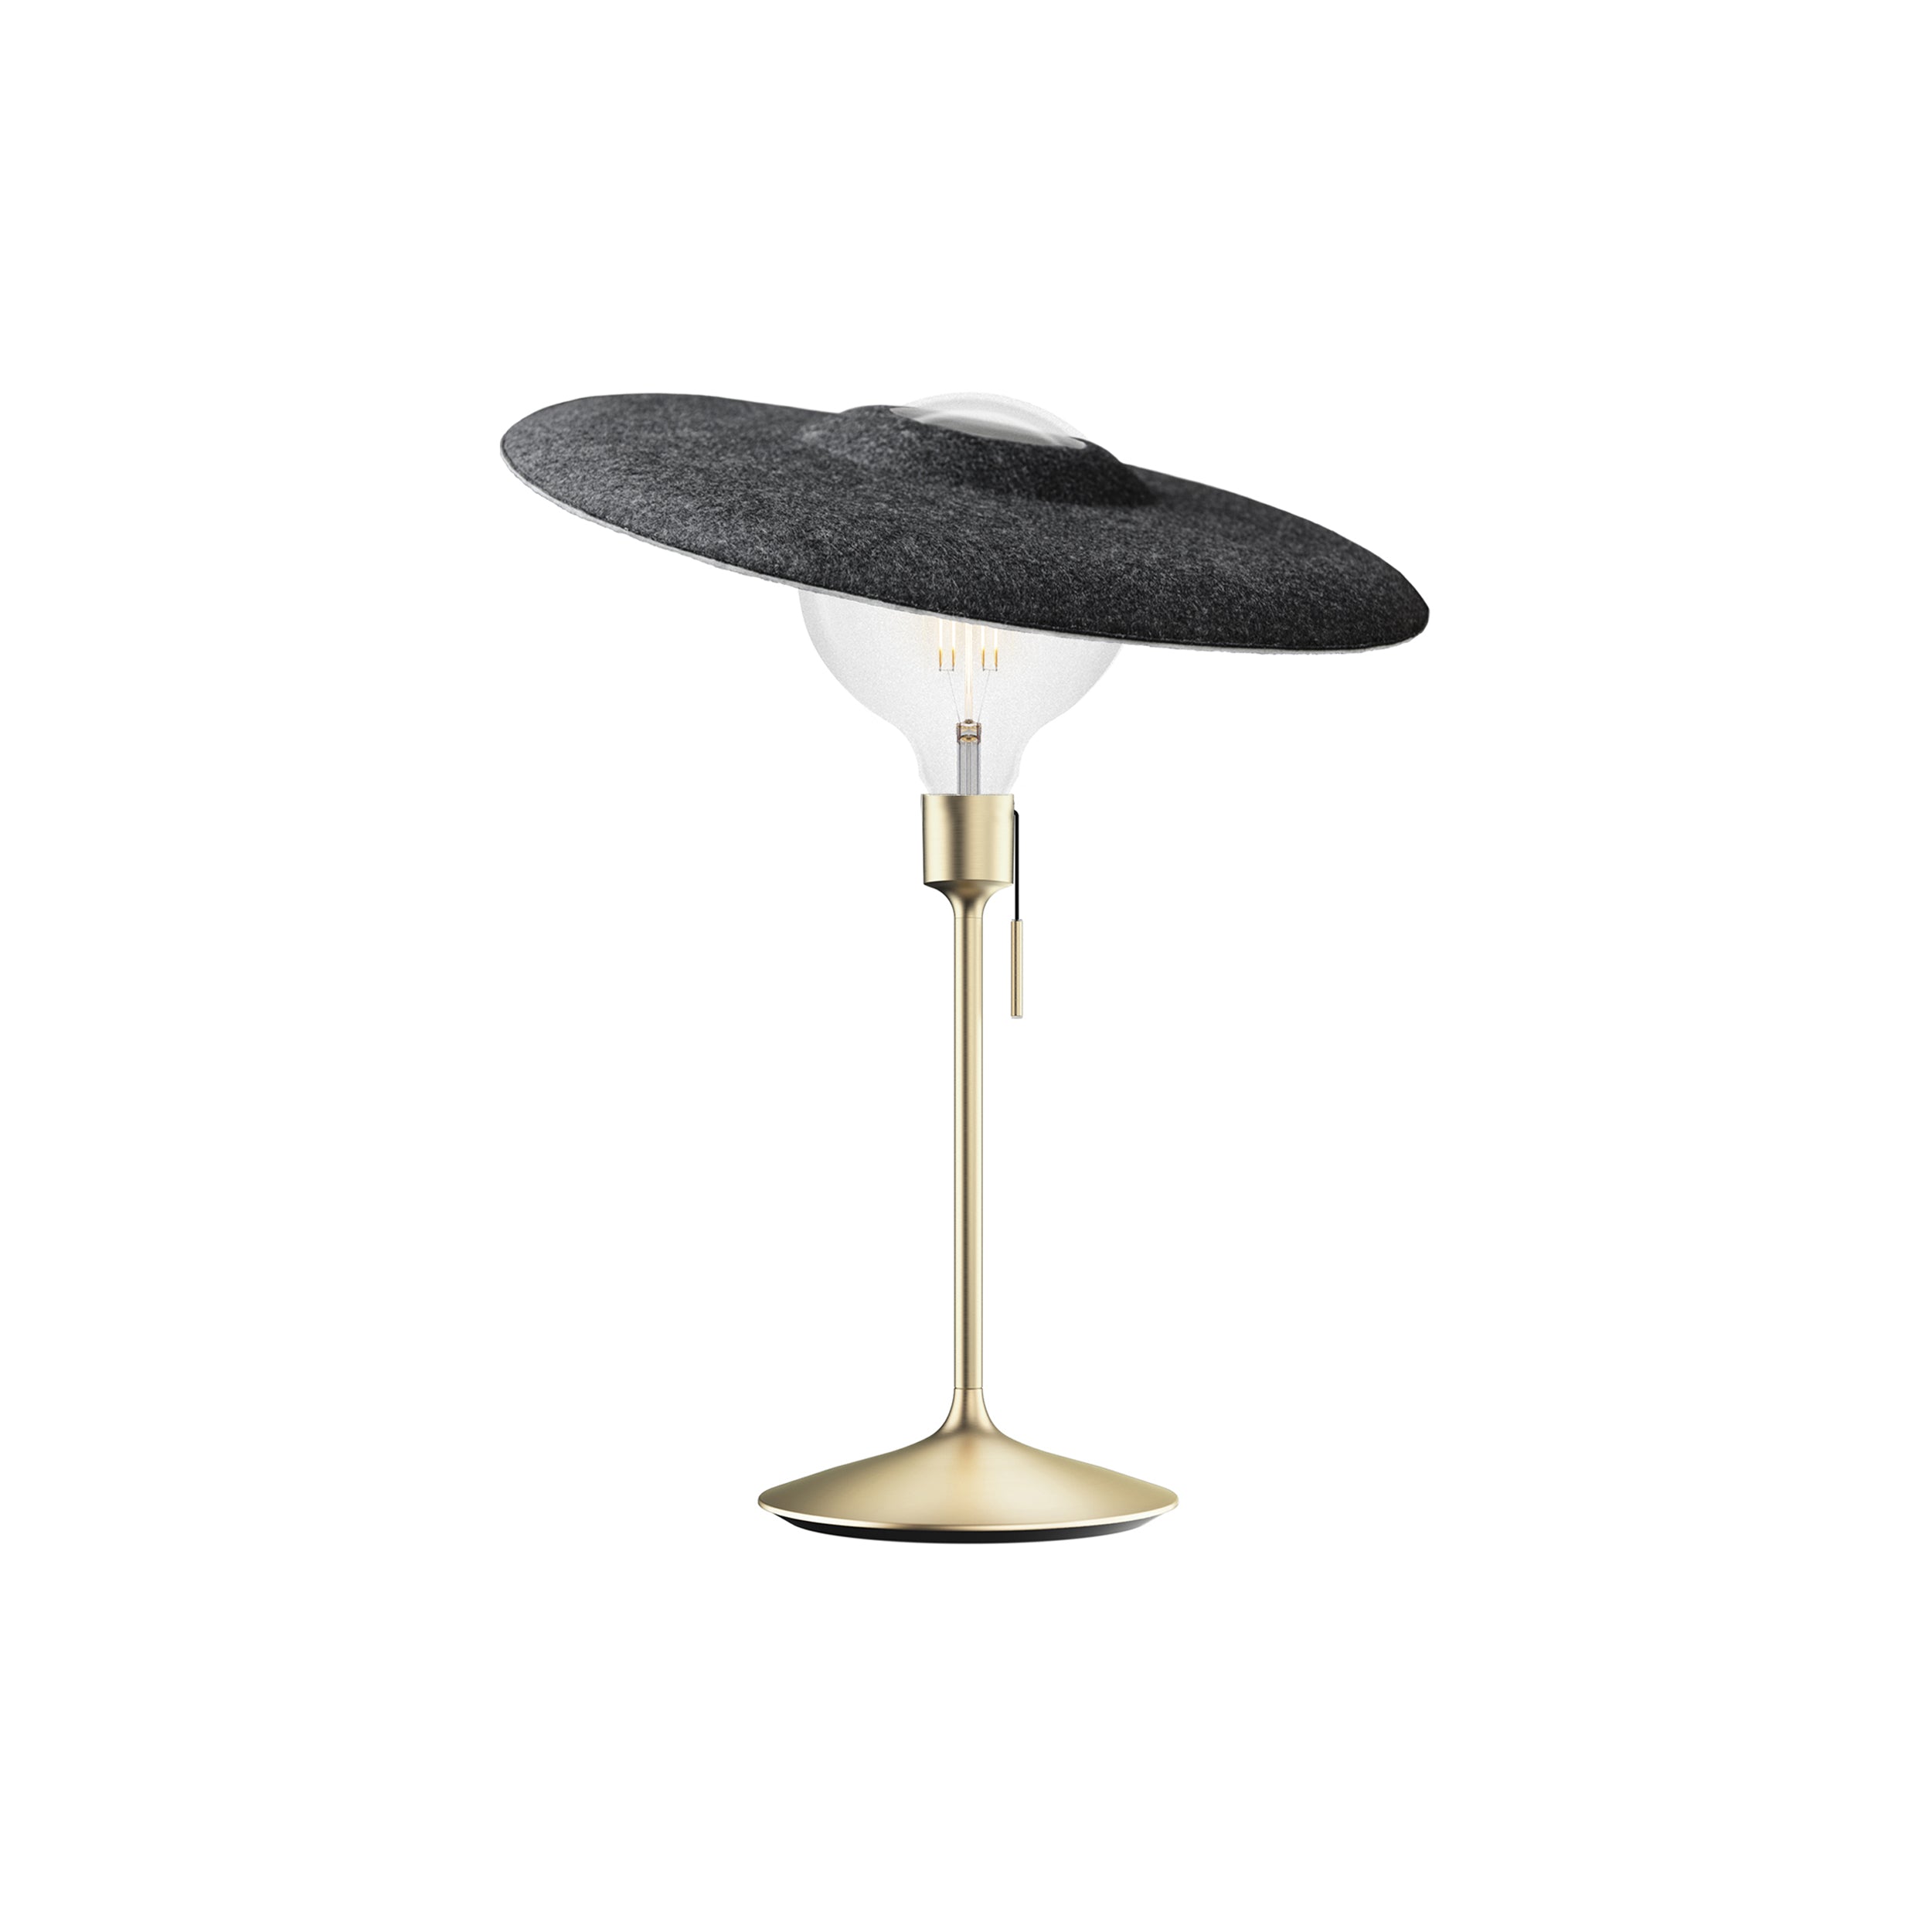 Shade Champagne Table Lamp: Brushed Brass + With Bulb (3 W)